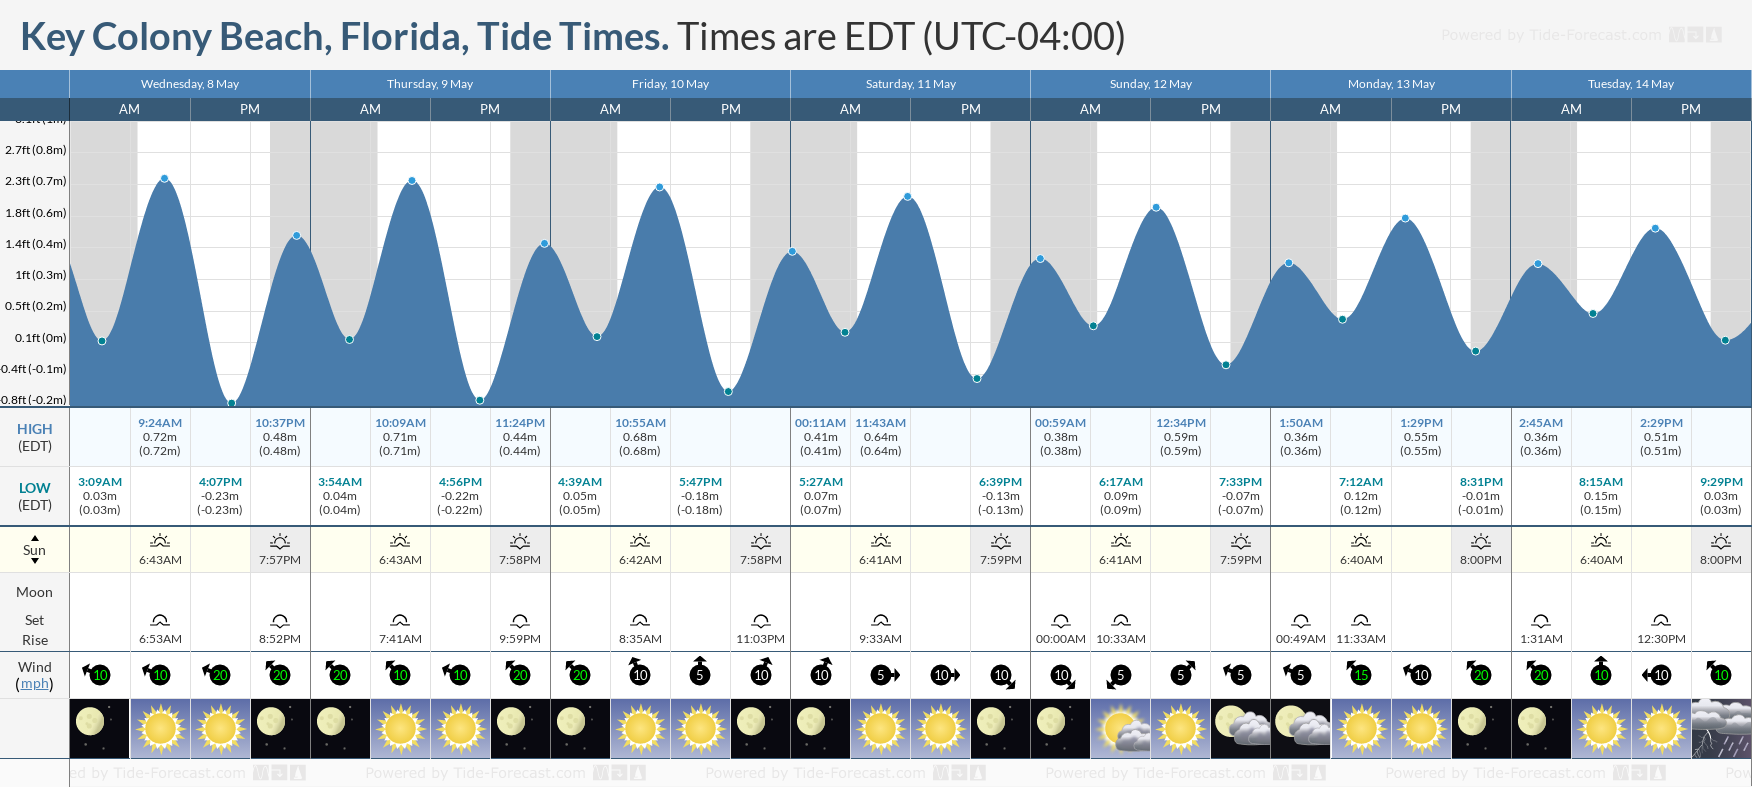 Key Colony Beach, Florida Tide Chart including high and low tide times for the next 7 days